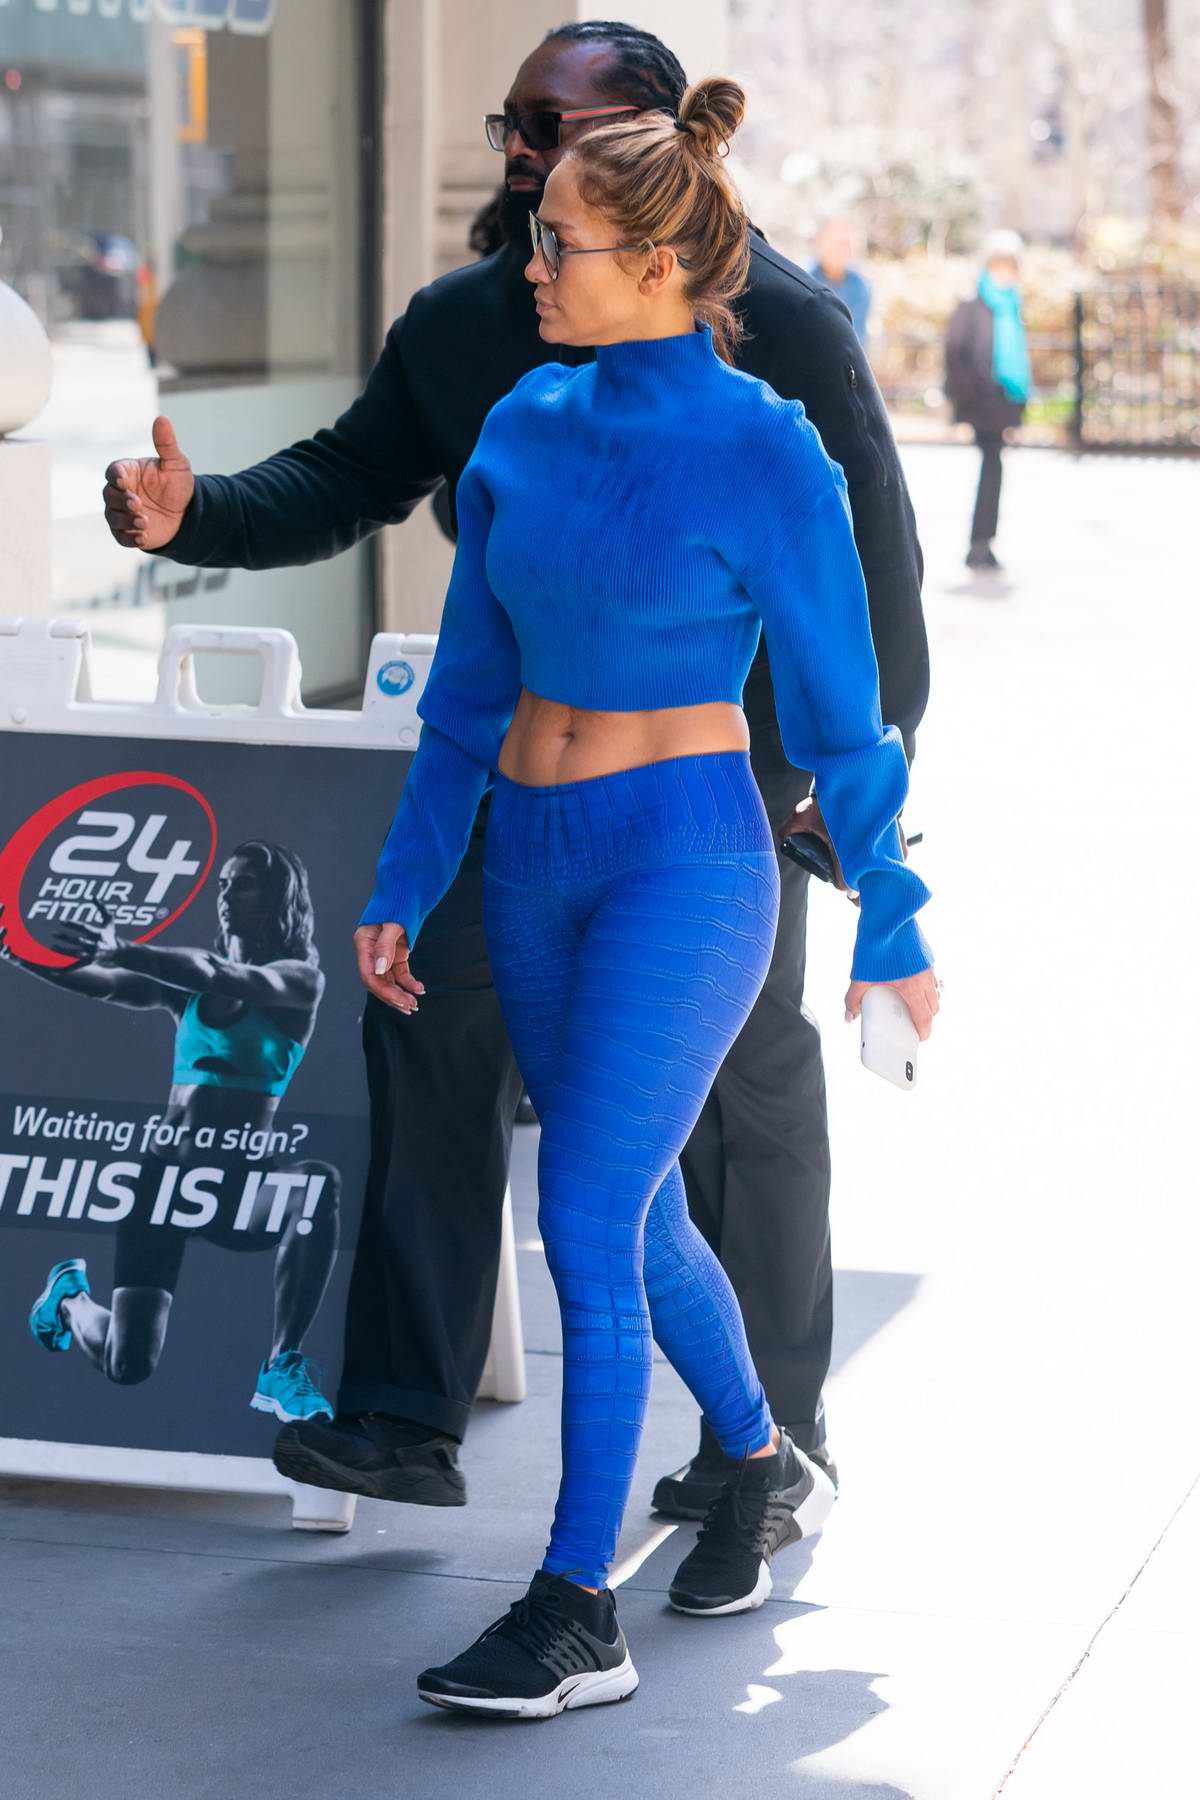 Jennifer Lopez Shows Off Her Abs In A Blue Crop Top With Matching Leggings While Heading To Gym